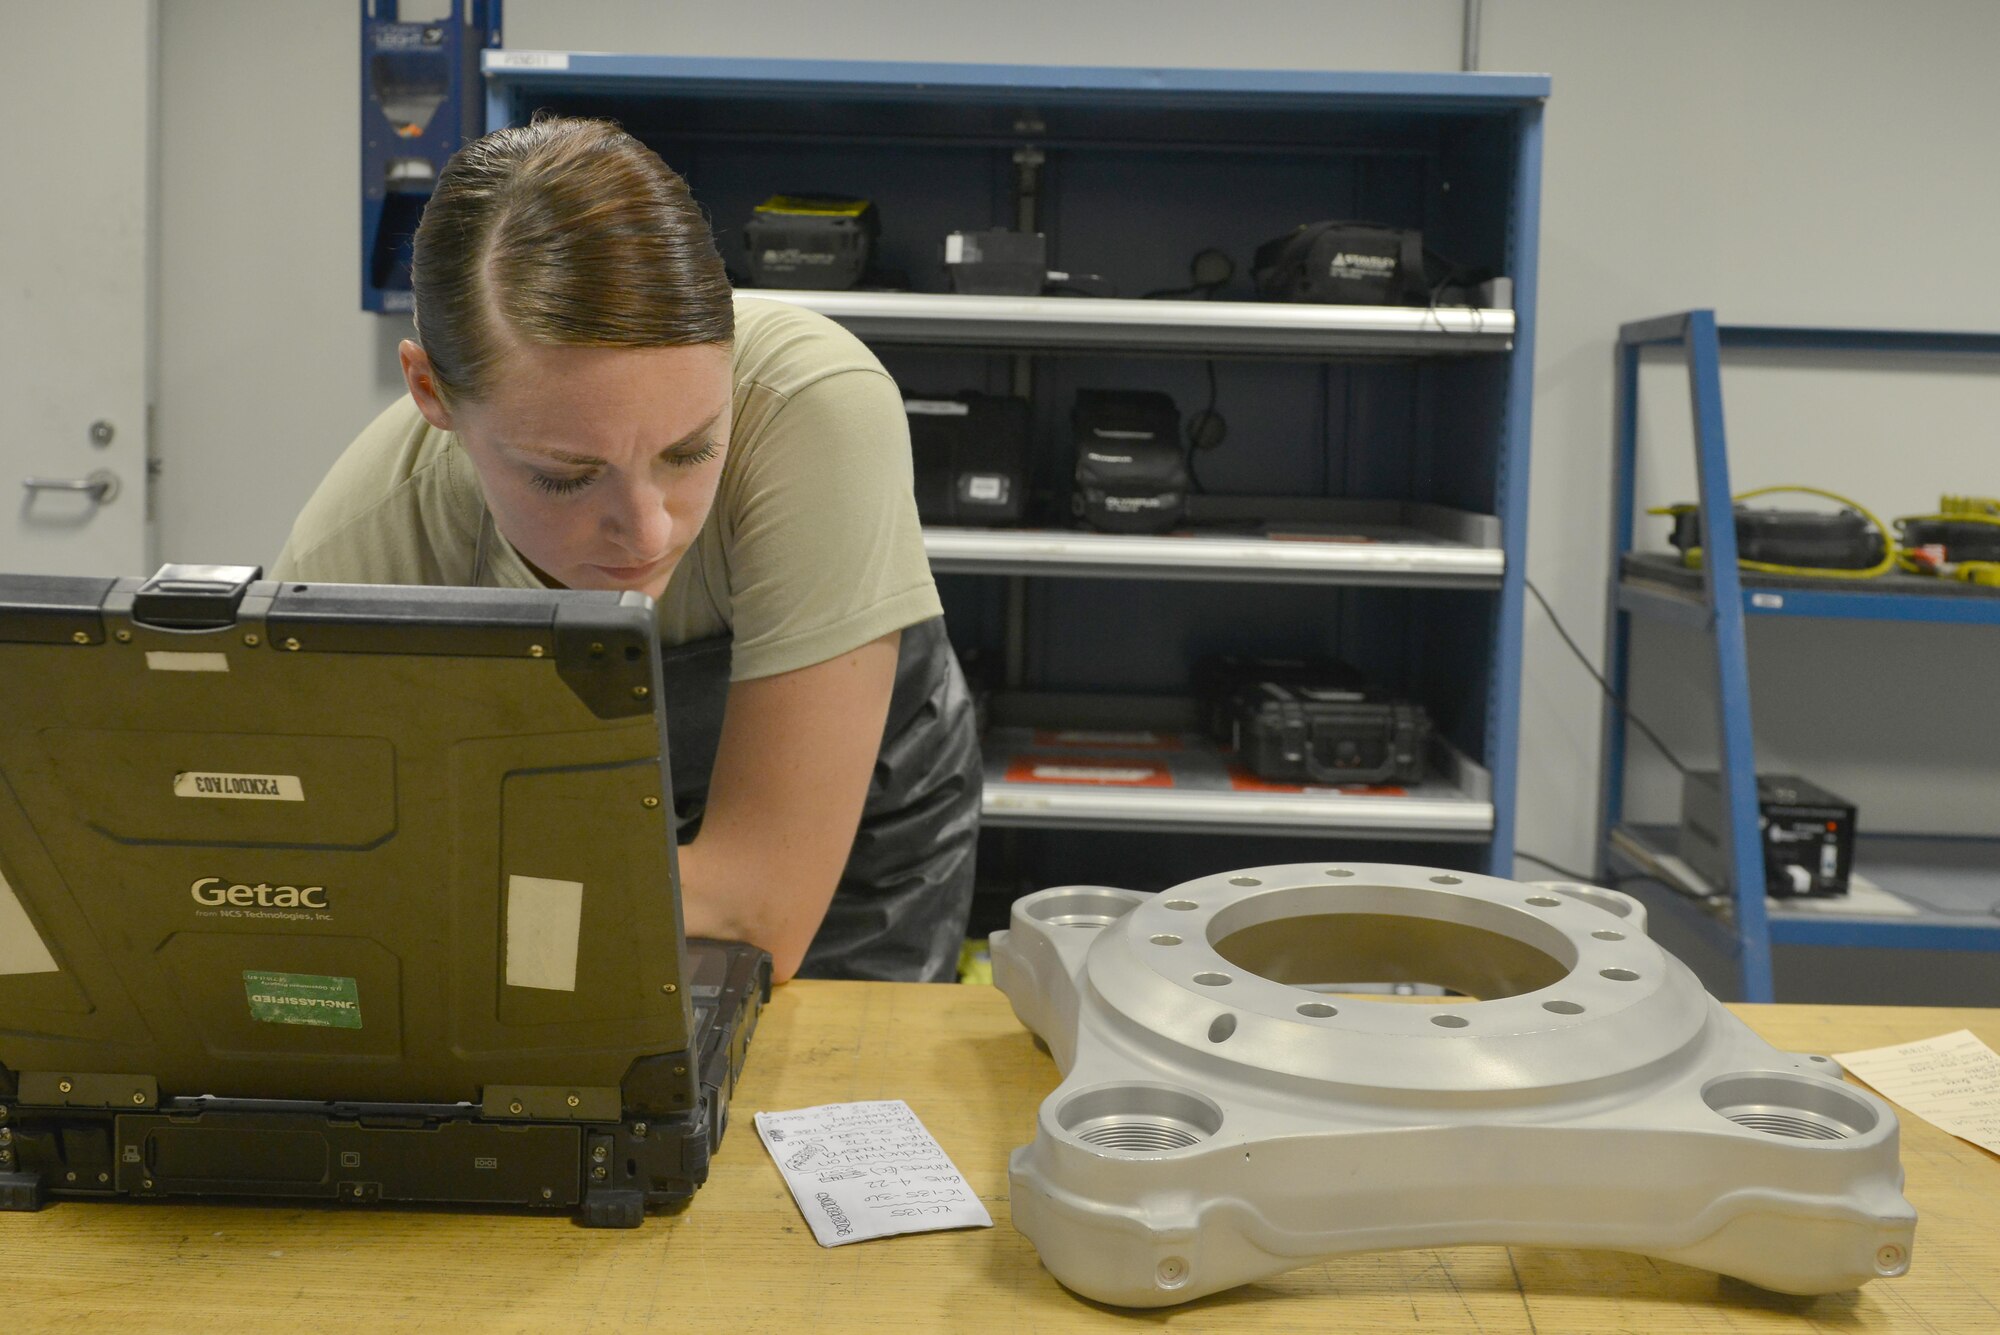 Airman 1st Class Amber Burns, 379th Expeditionary Maintenance Squadron Nondestructive Inspection laboratory, looks up information inside her digital technical orders for a brake housing component that needs to be tested for its stability before being installed on a KC-135 Stratotanker August 12, 2015 at Al Udeid Air Base, Qatar. NDI Airmen inspect for cracks and flaws on aircraft and their components, aerospace ground equipment and safety equipment.  They also test jet engine oil samples, using a variety of methods, like magnetic particle, fluorescent penetrant, eddy current, radiography, optical and ultrasonic equipment. (U.S. Air Force photo/Staff Sgt. Alexandre Montes)   